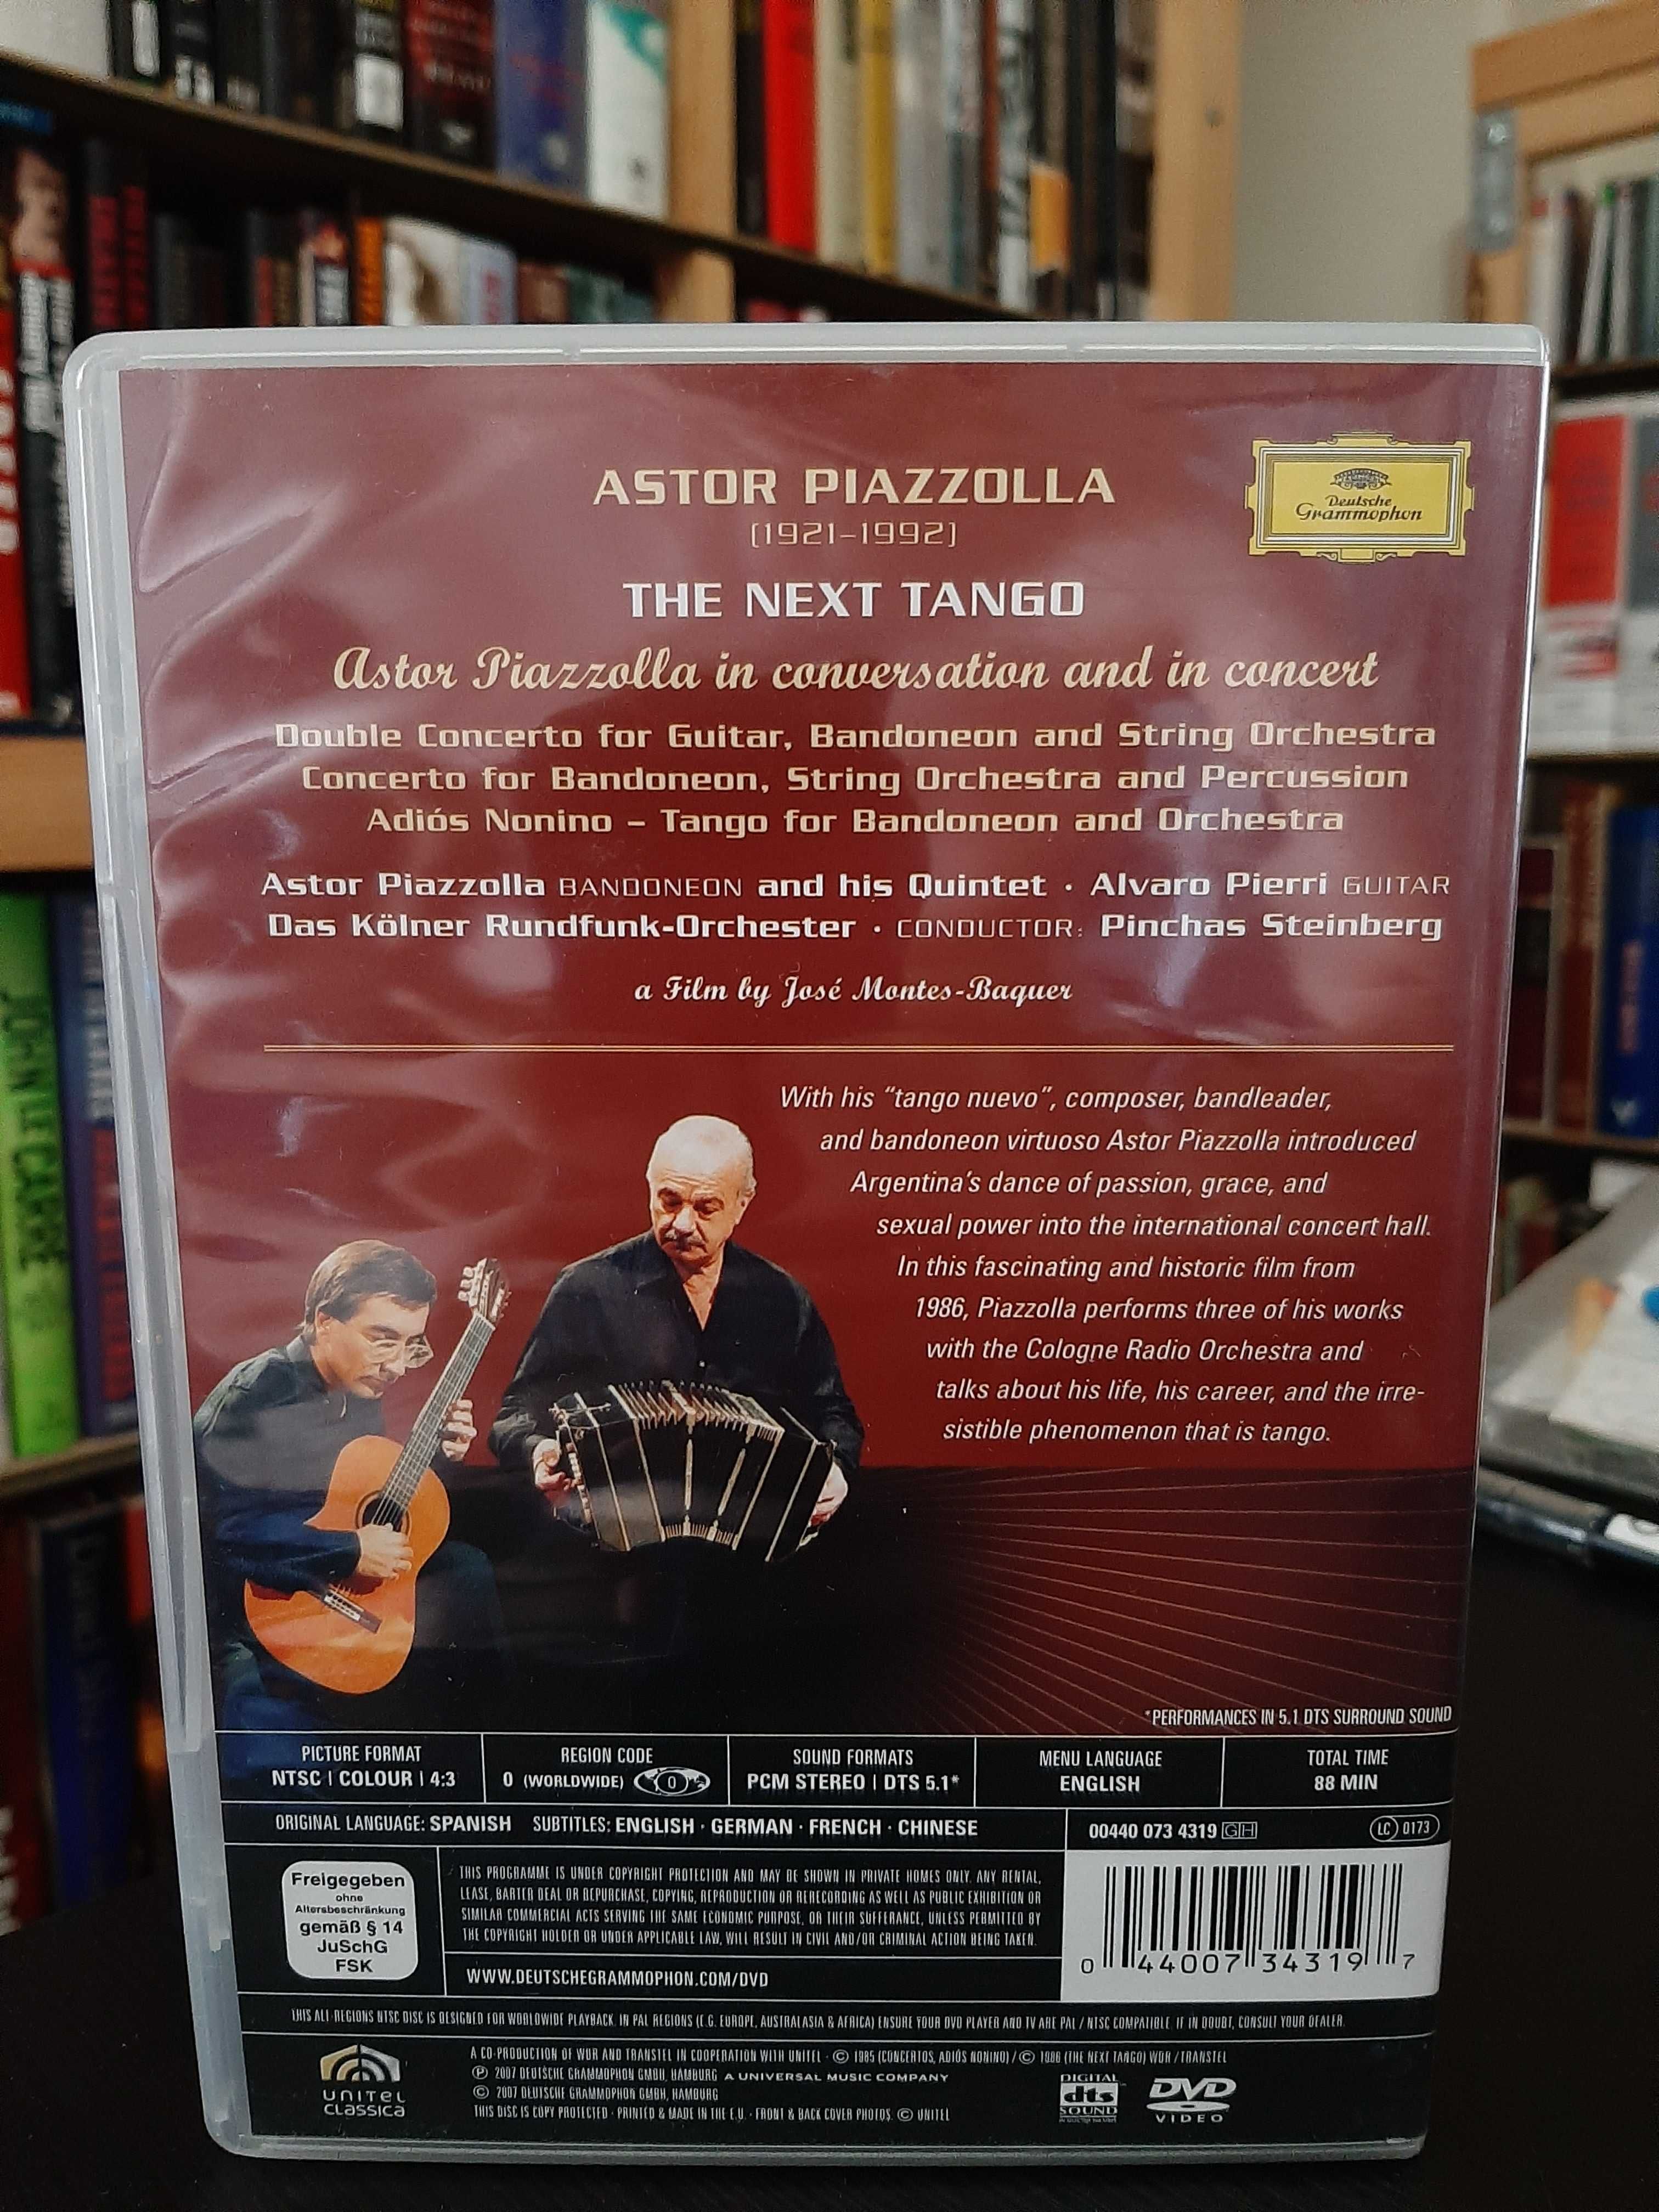 Astor Piazzolla in Conversation and in Concert: The Next Tango